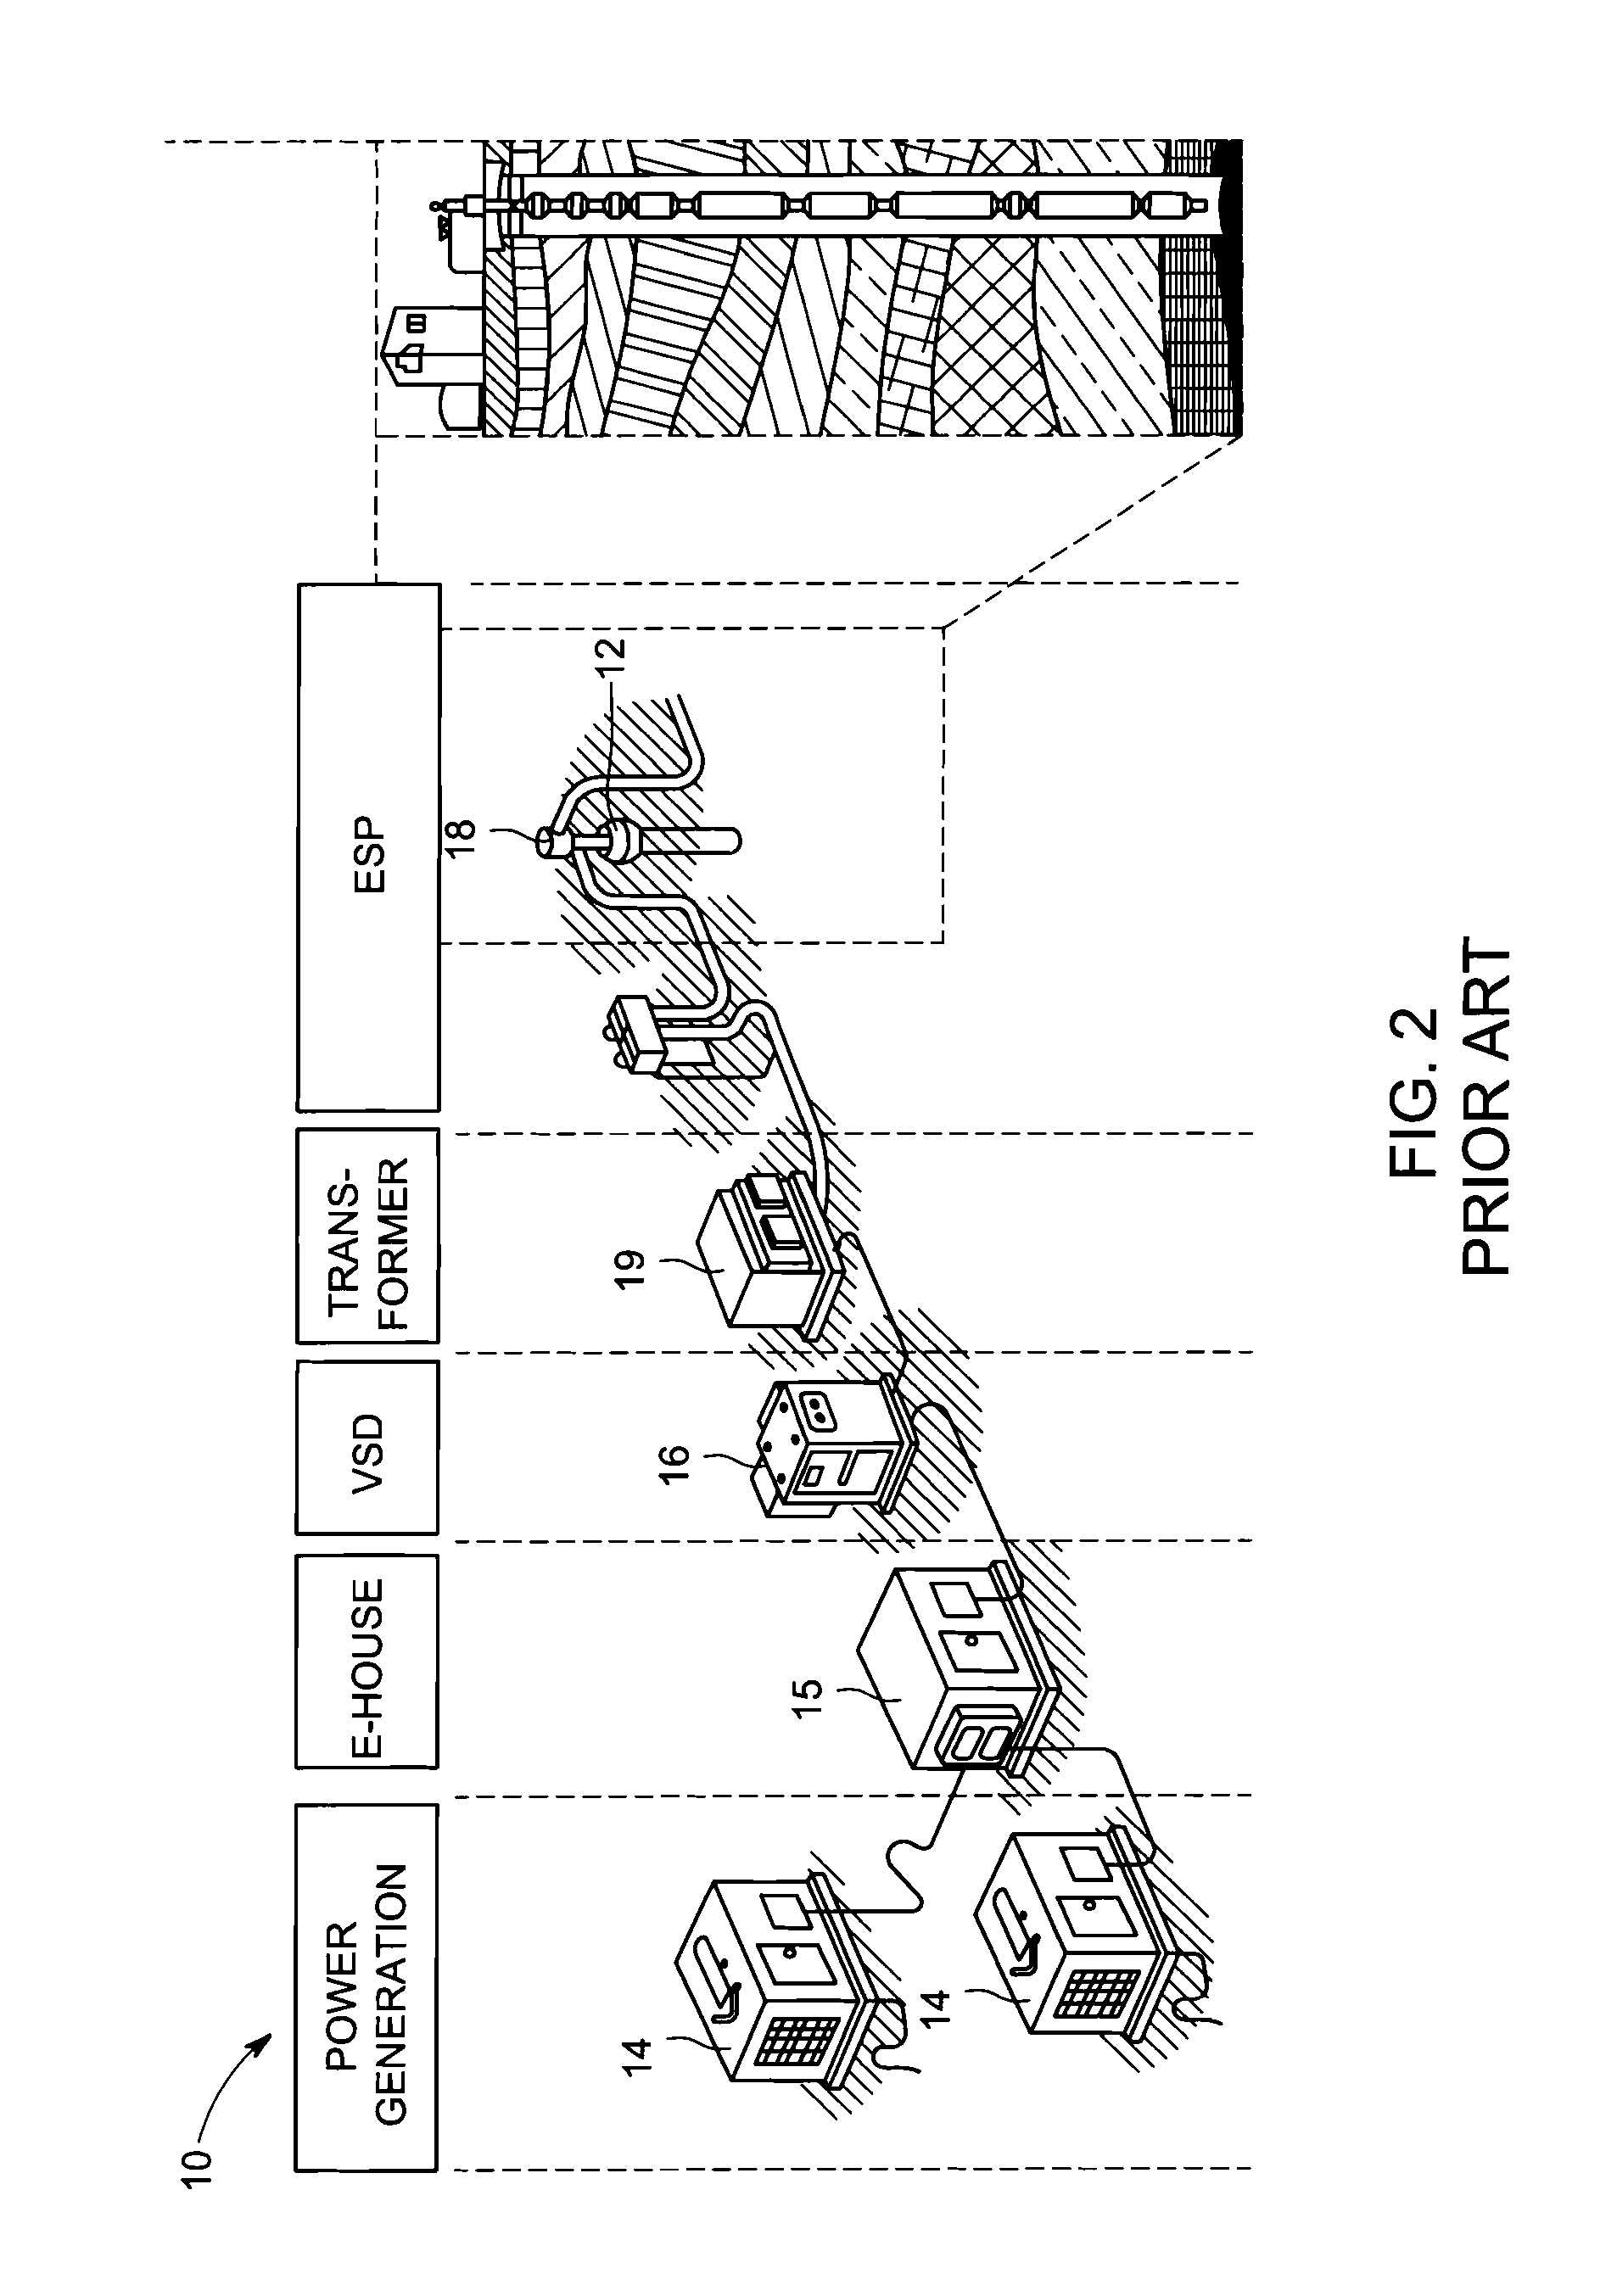 System and method for driving multiple pumps electrically with a single prime mover